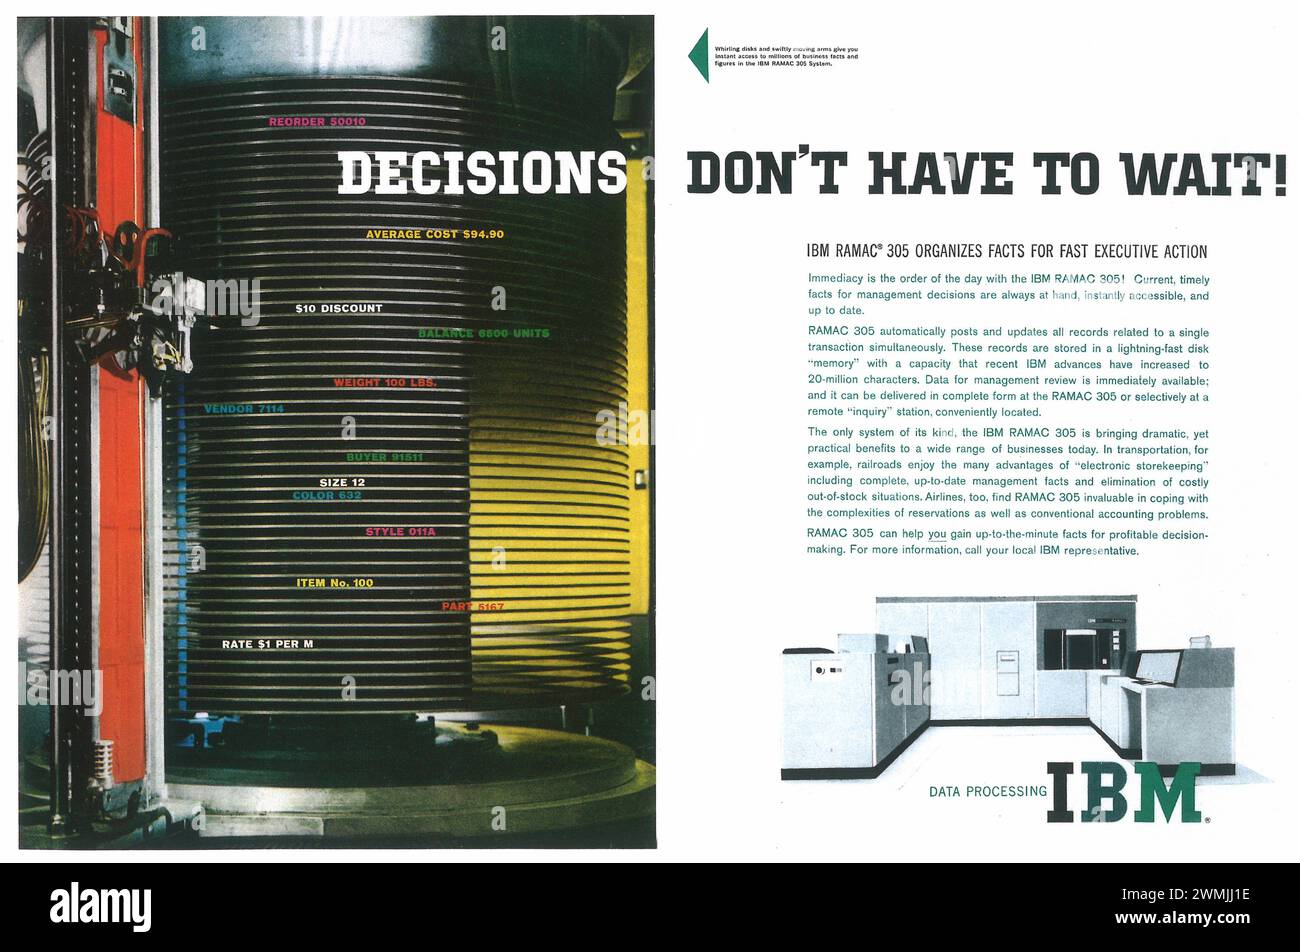 1956 IBM Ramac 305 computer print ad. 'Decisions don't have to wait!' Stock Photo